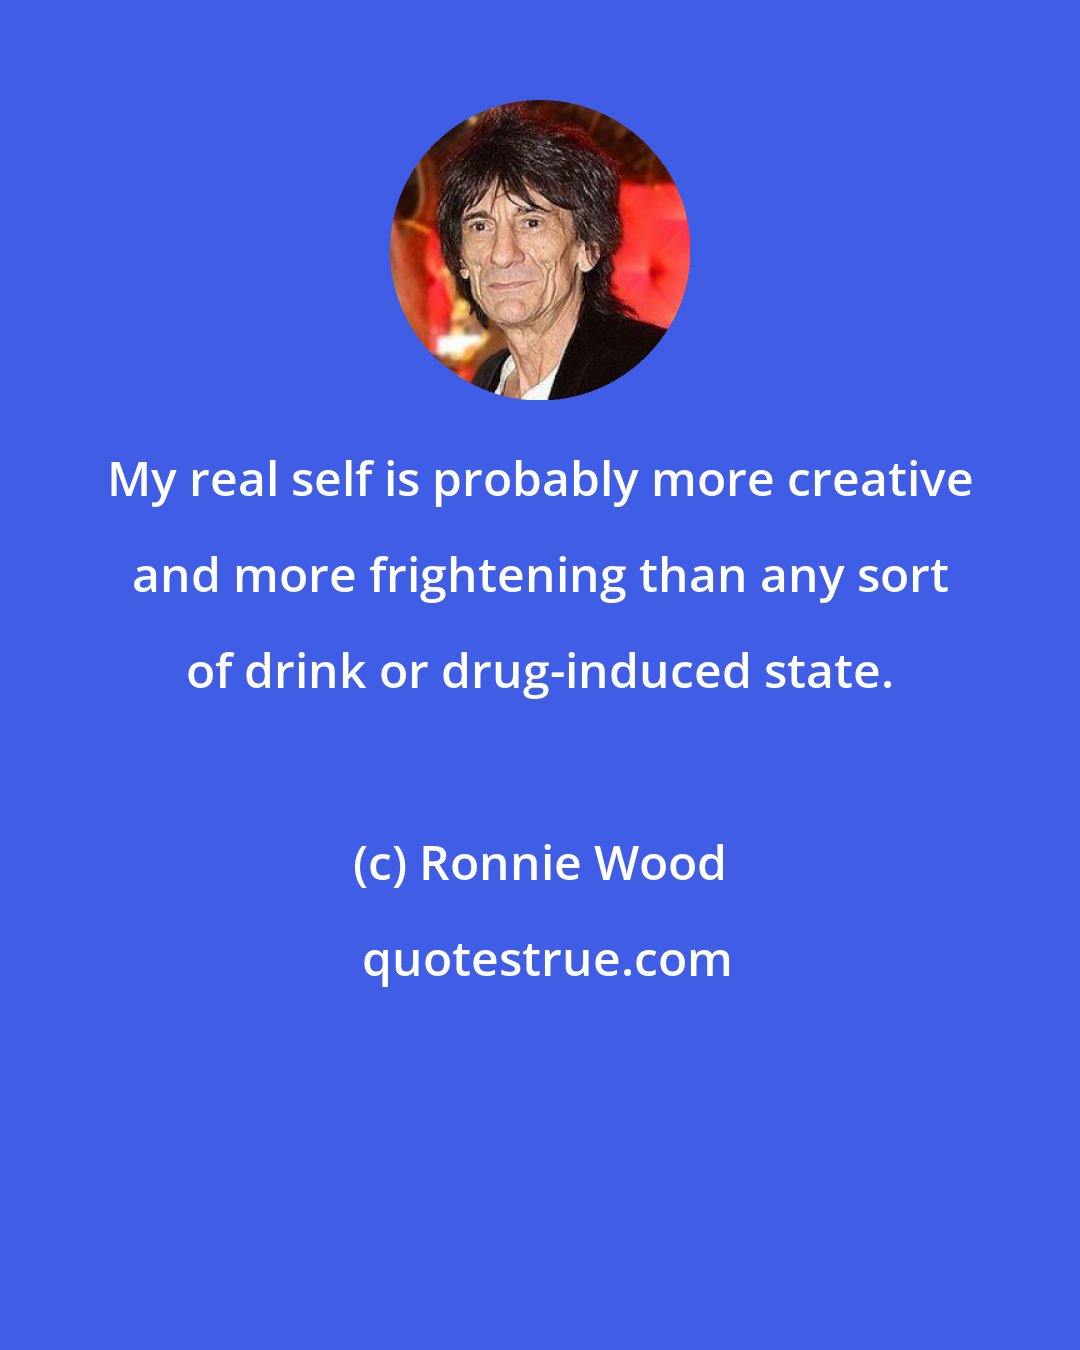 Ronnie Wood: My real self is probably more creative and more frightening than any sort of drink or drug-induced state.